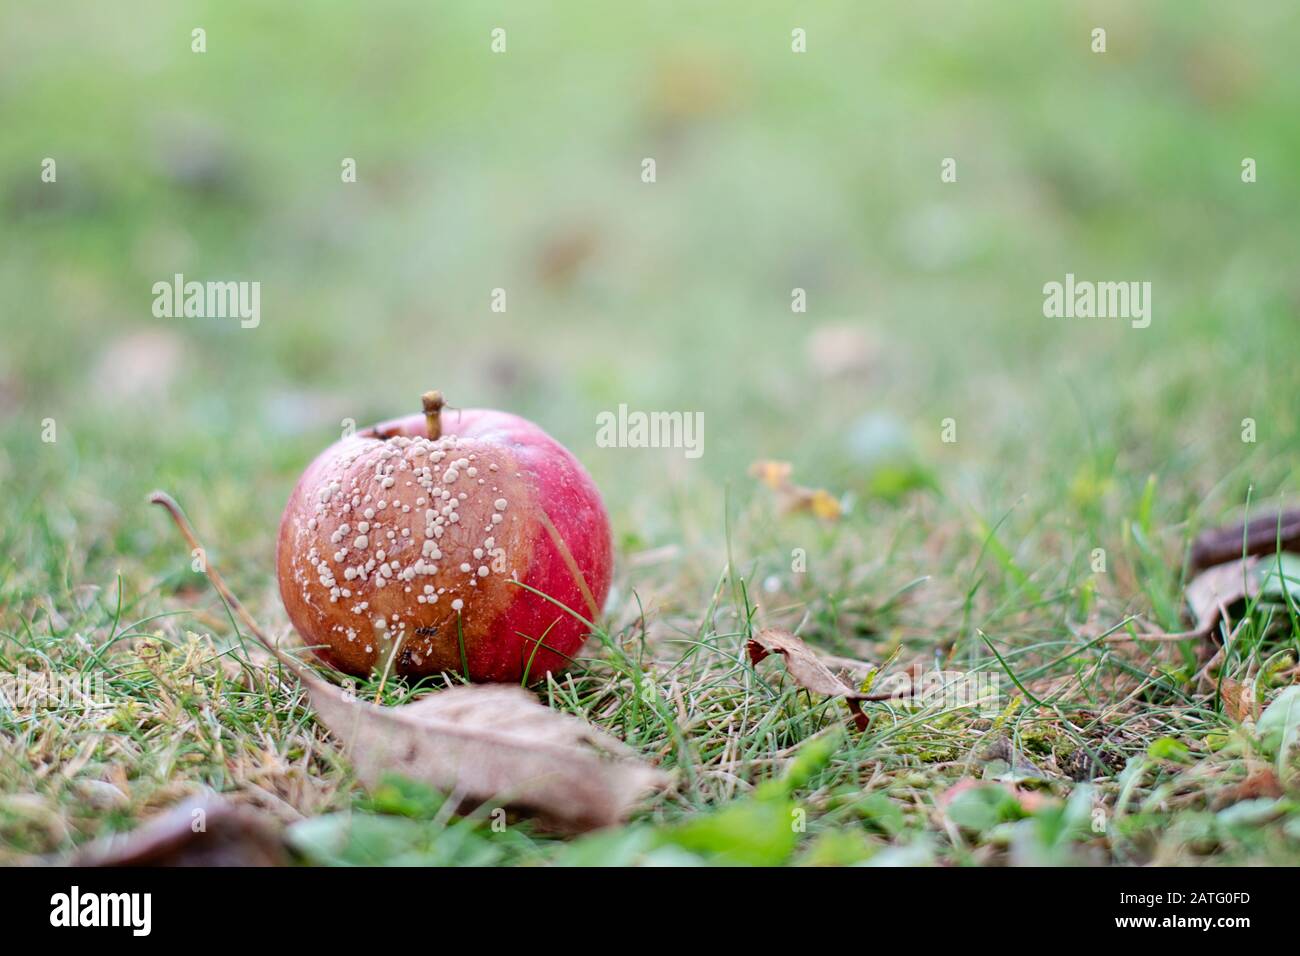 Selective focus on rotten red apple on the grass in sunny autumn day. Close-up image of rotten apple. Decaying apple front view. Blurred background. Stock Photo